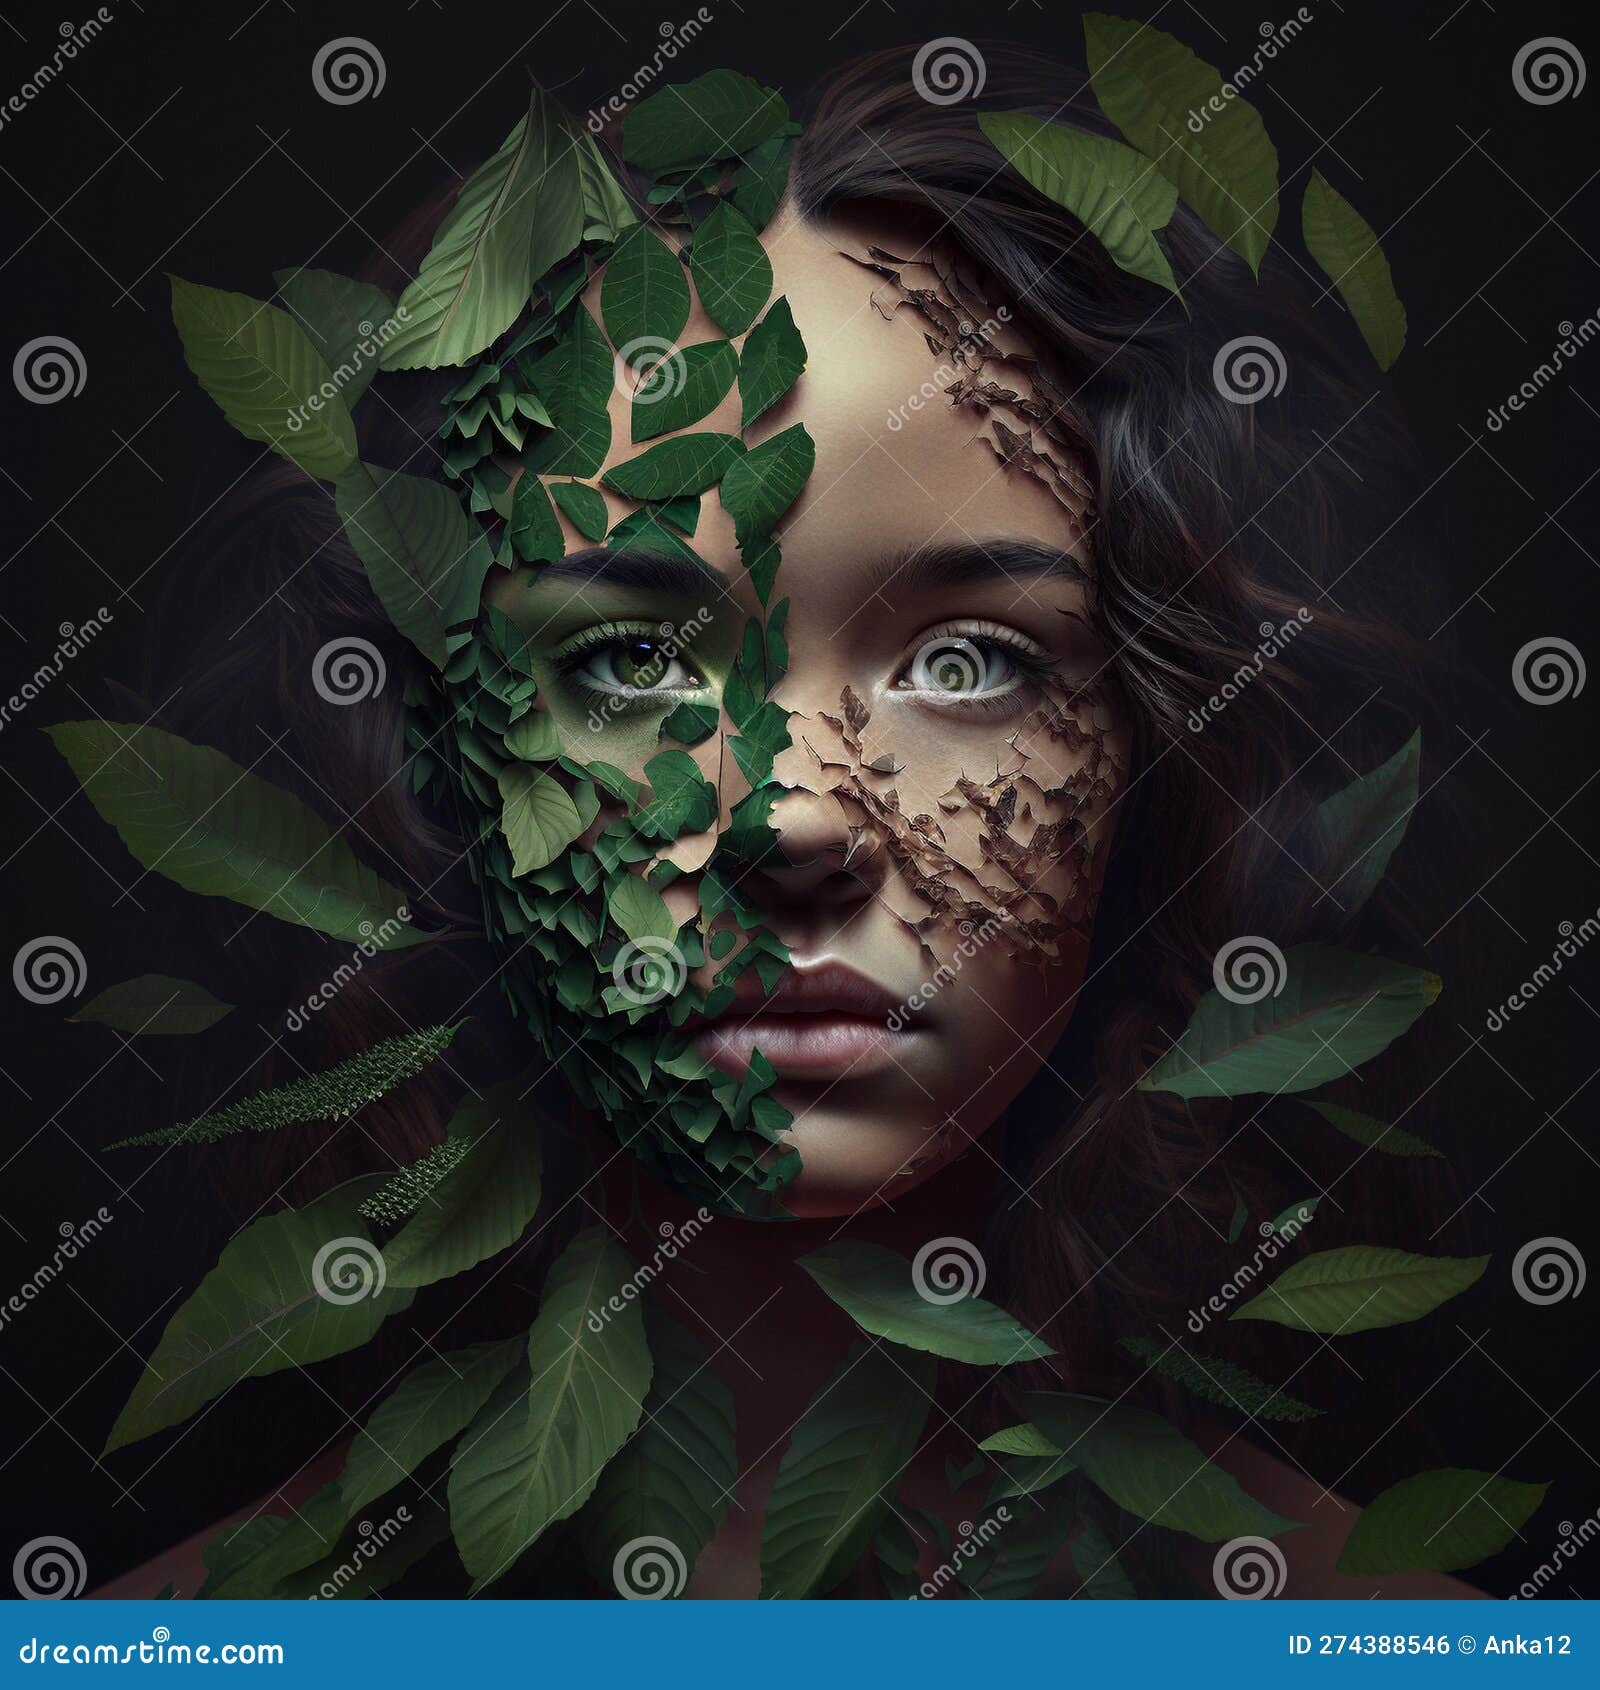 Woman Face With Greenery Skin Portrait Of Young Girl With Leaves In Hair As Concept For World